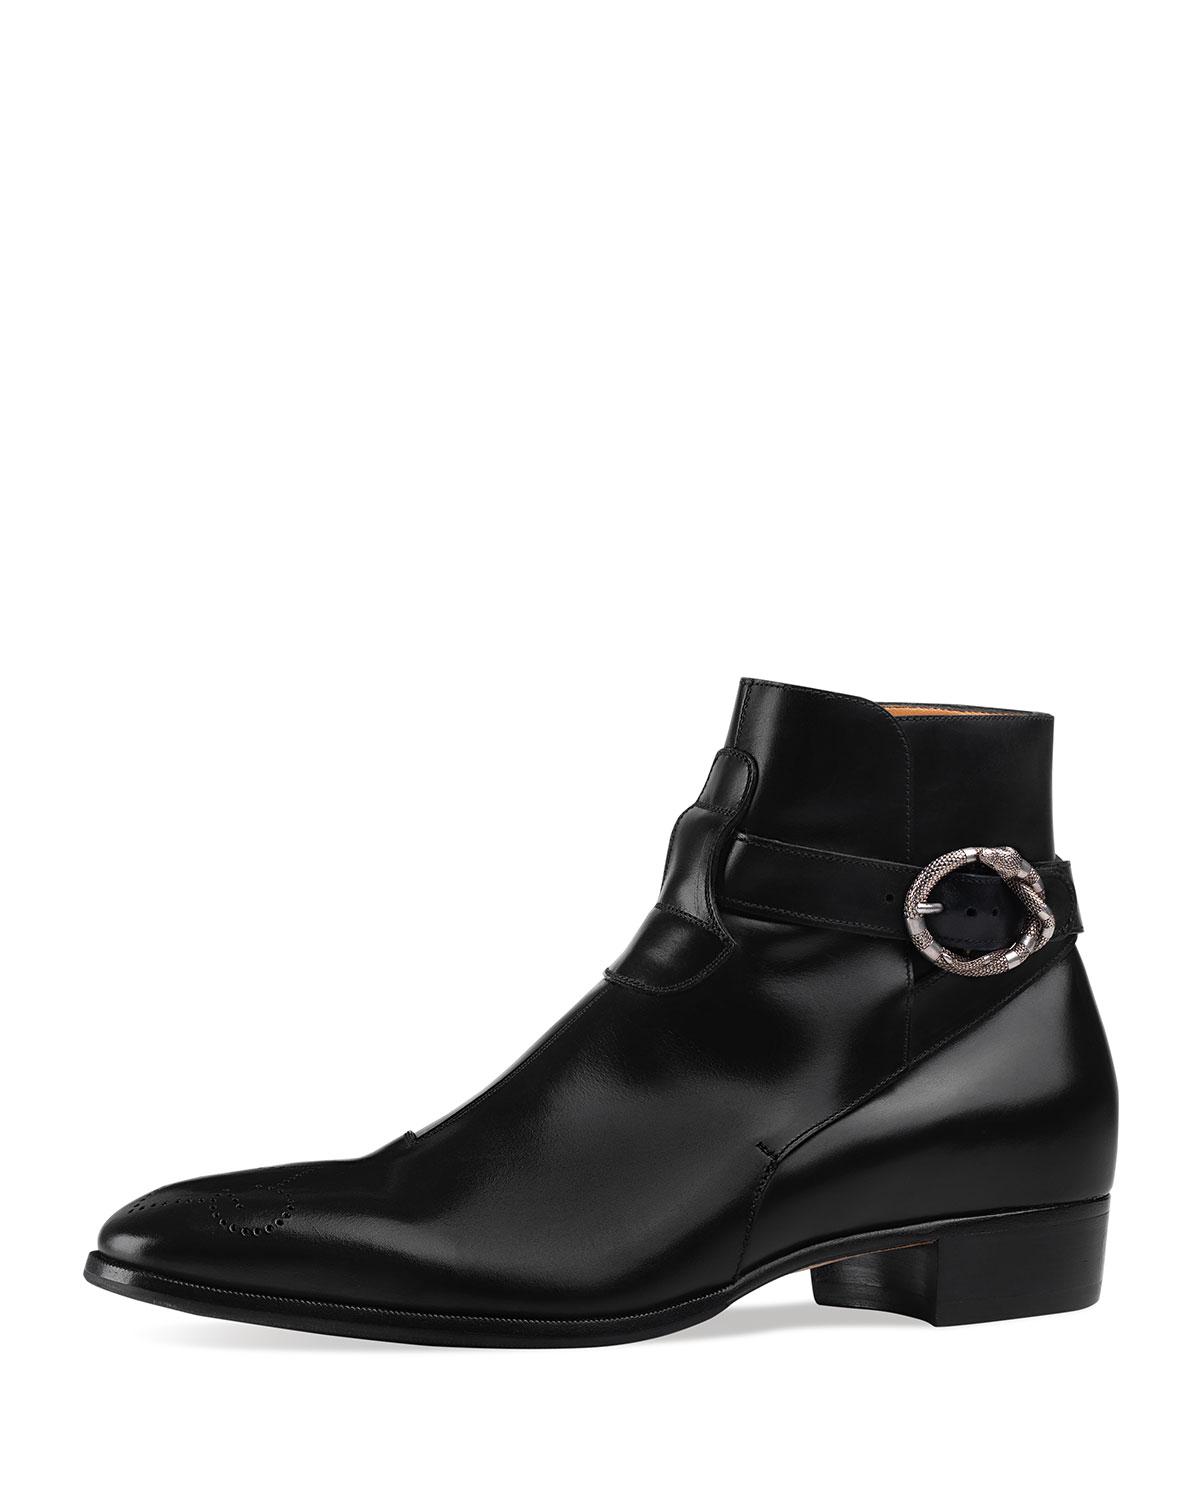 gucci mens ankle boots